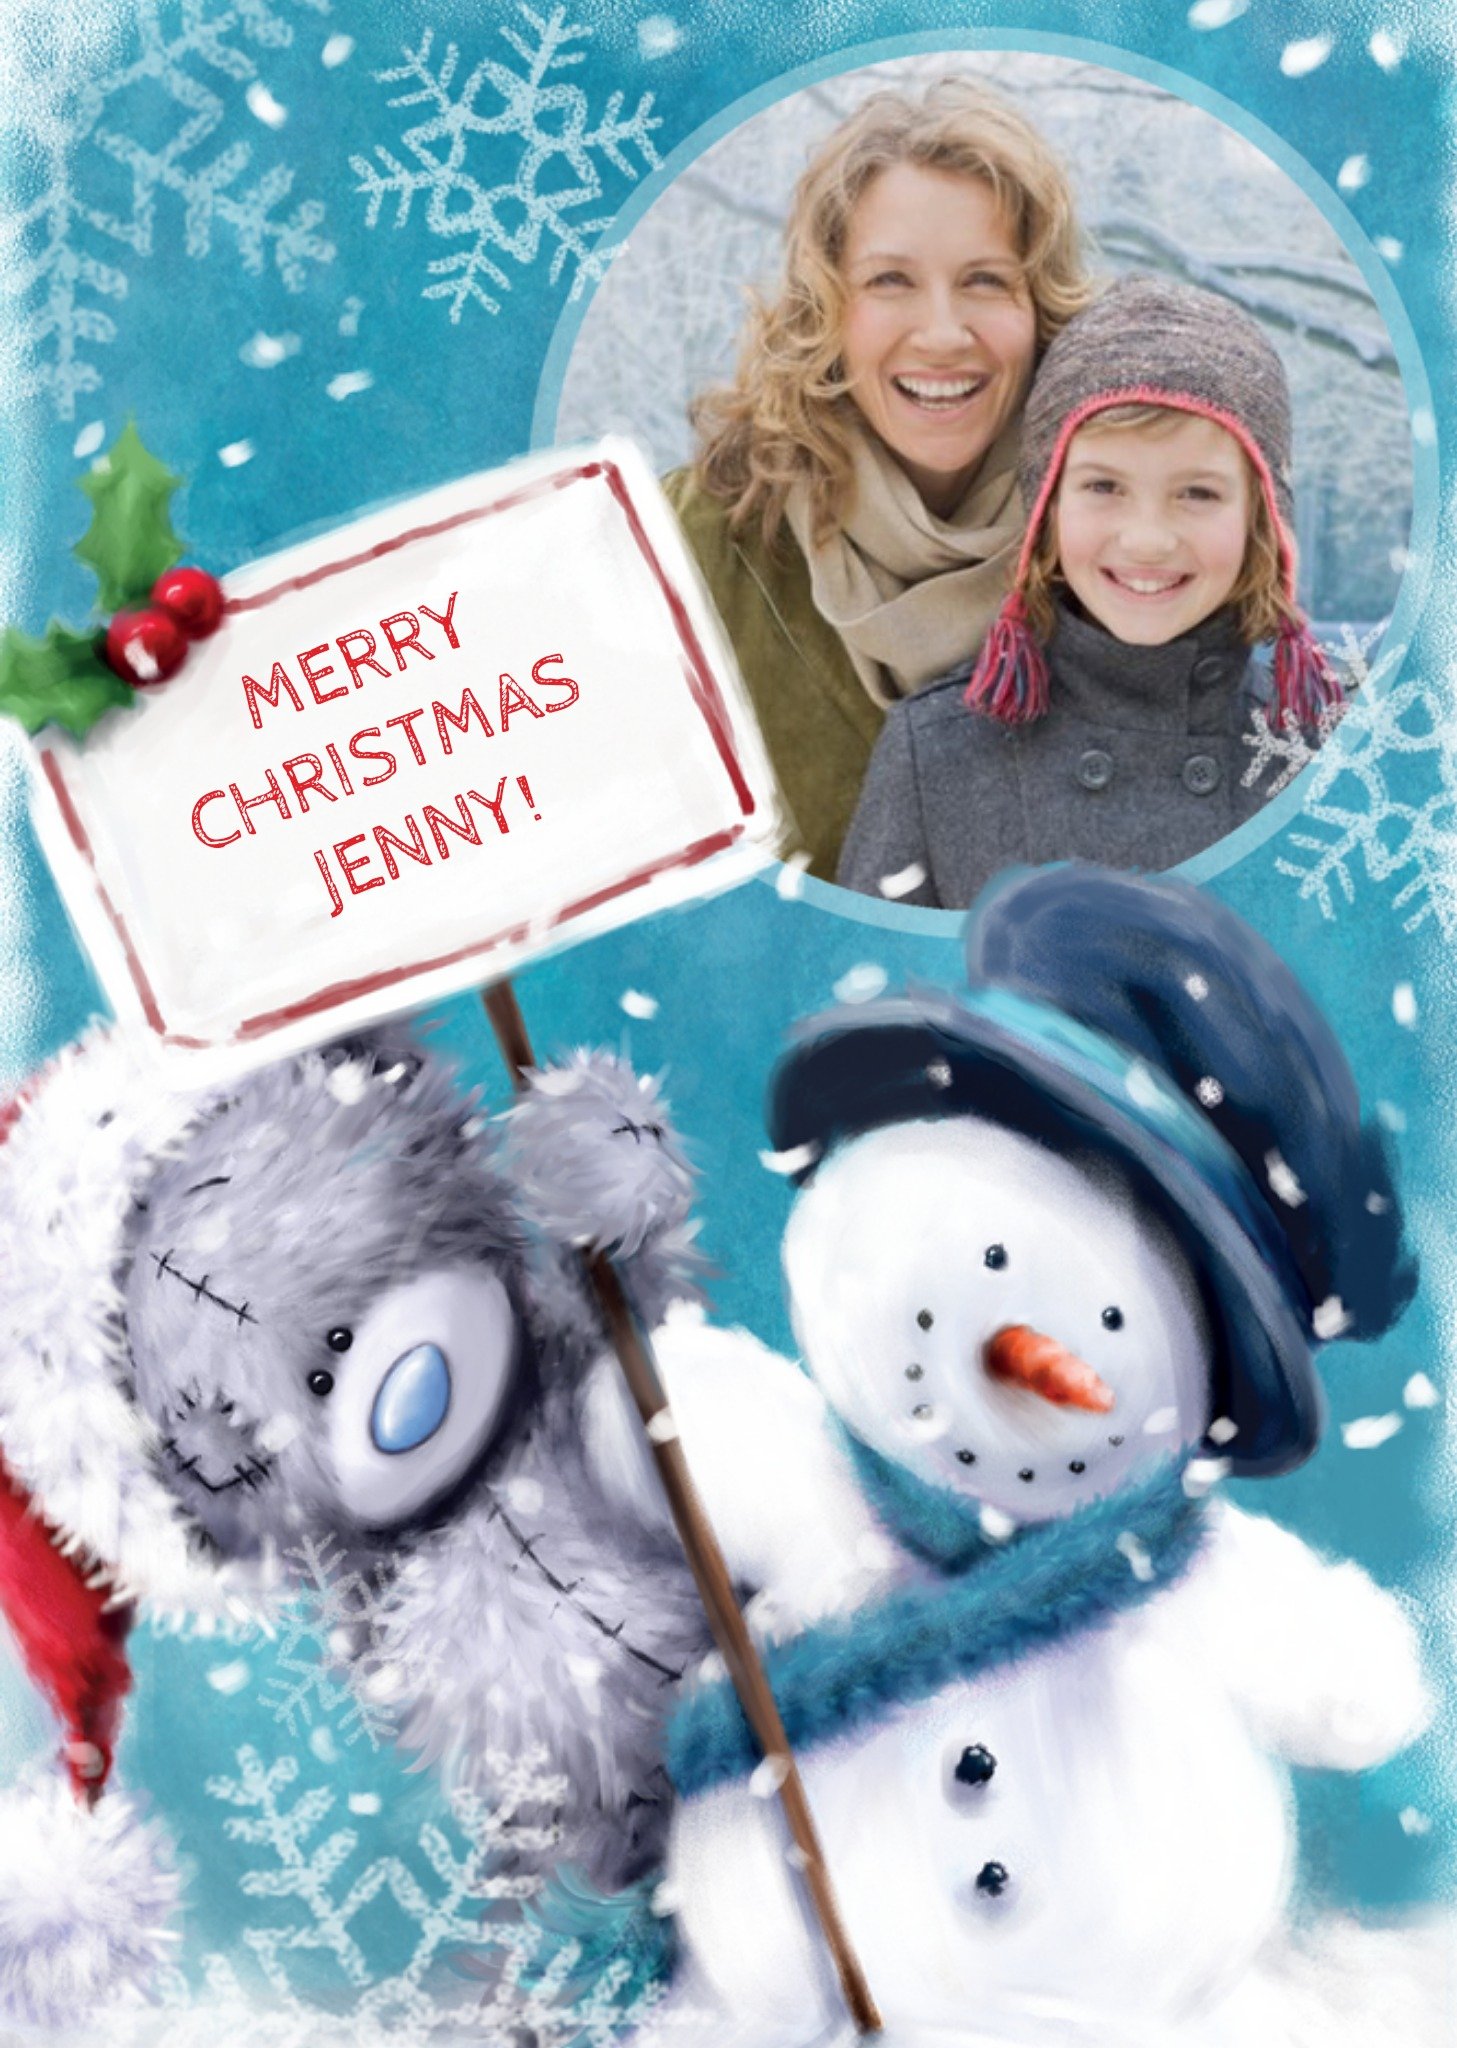 Me To You Tatty Teddy With Snowman Snowflakes Personalised Photo Upload Merry Christmas Card Ecard